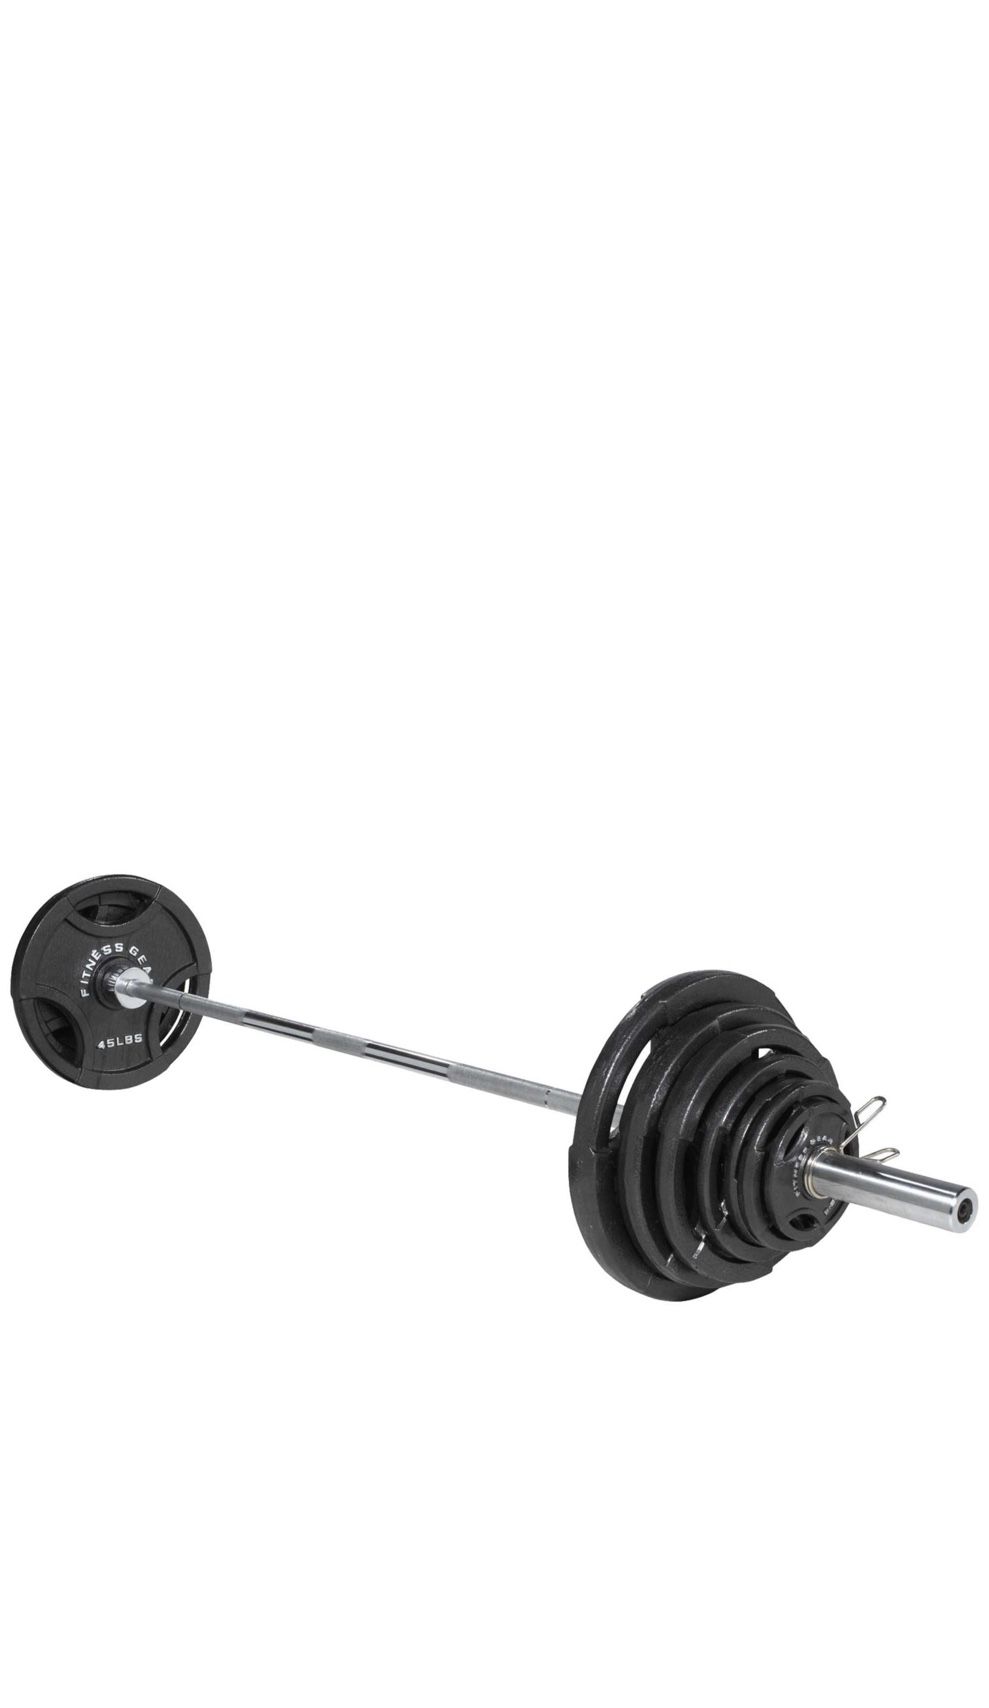 300 Lbs Weight Set/ With Bar